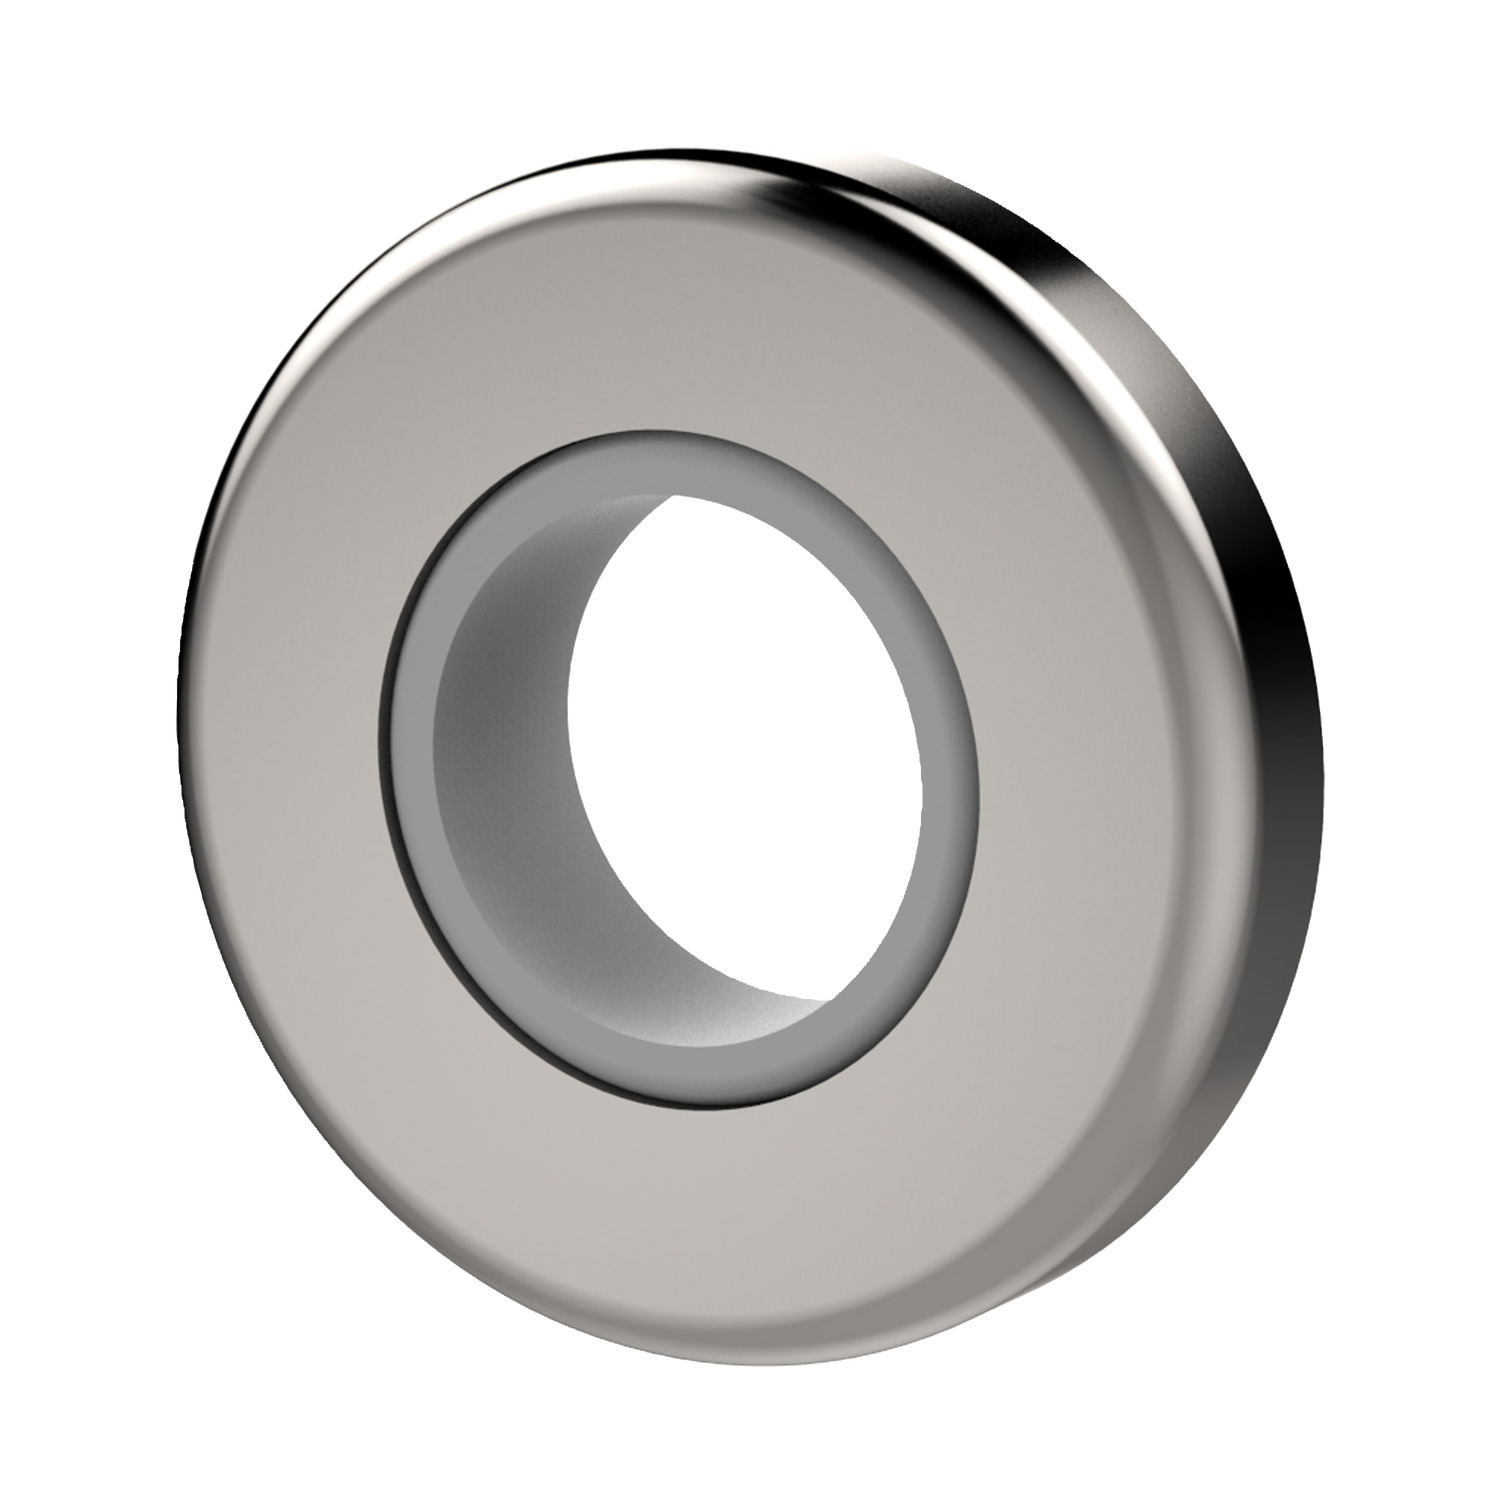 36637.W0040 Pressure-rated sealing washer - M 4x4,1 A2 stainless steel